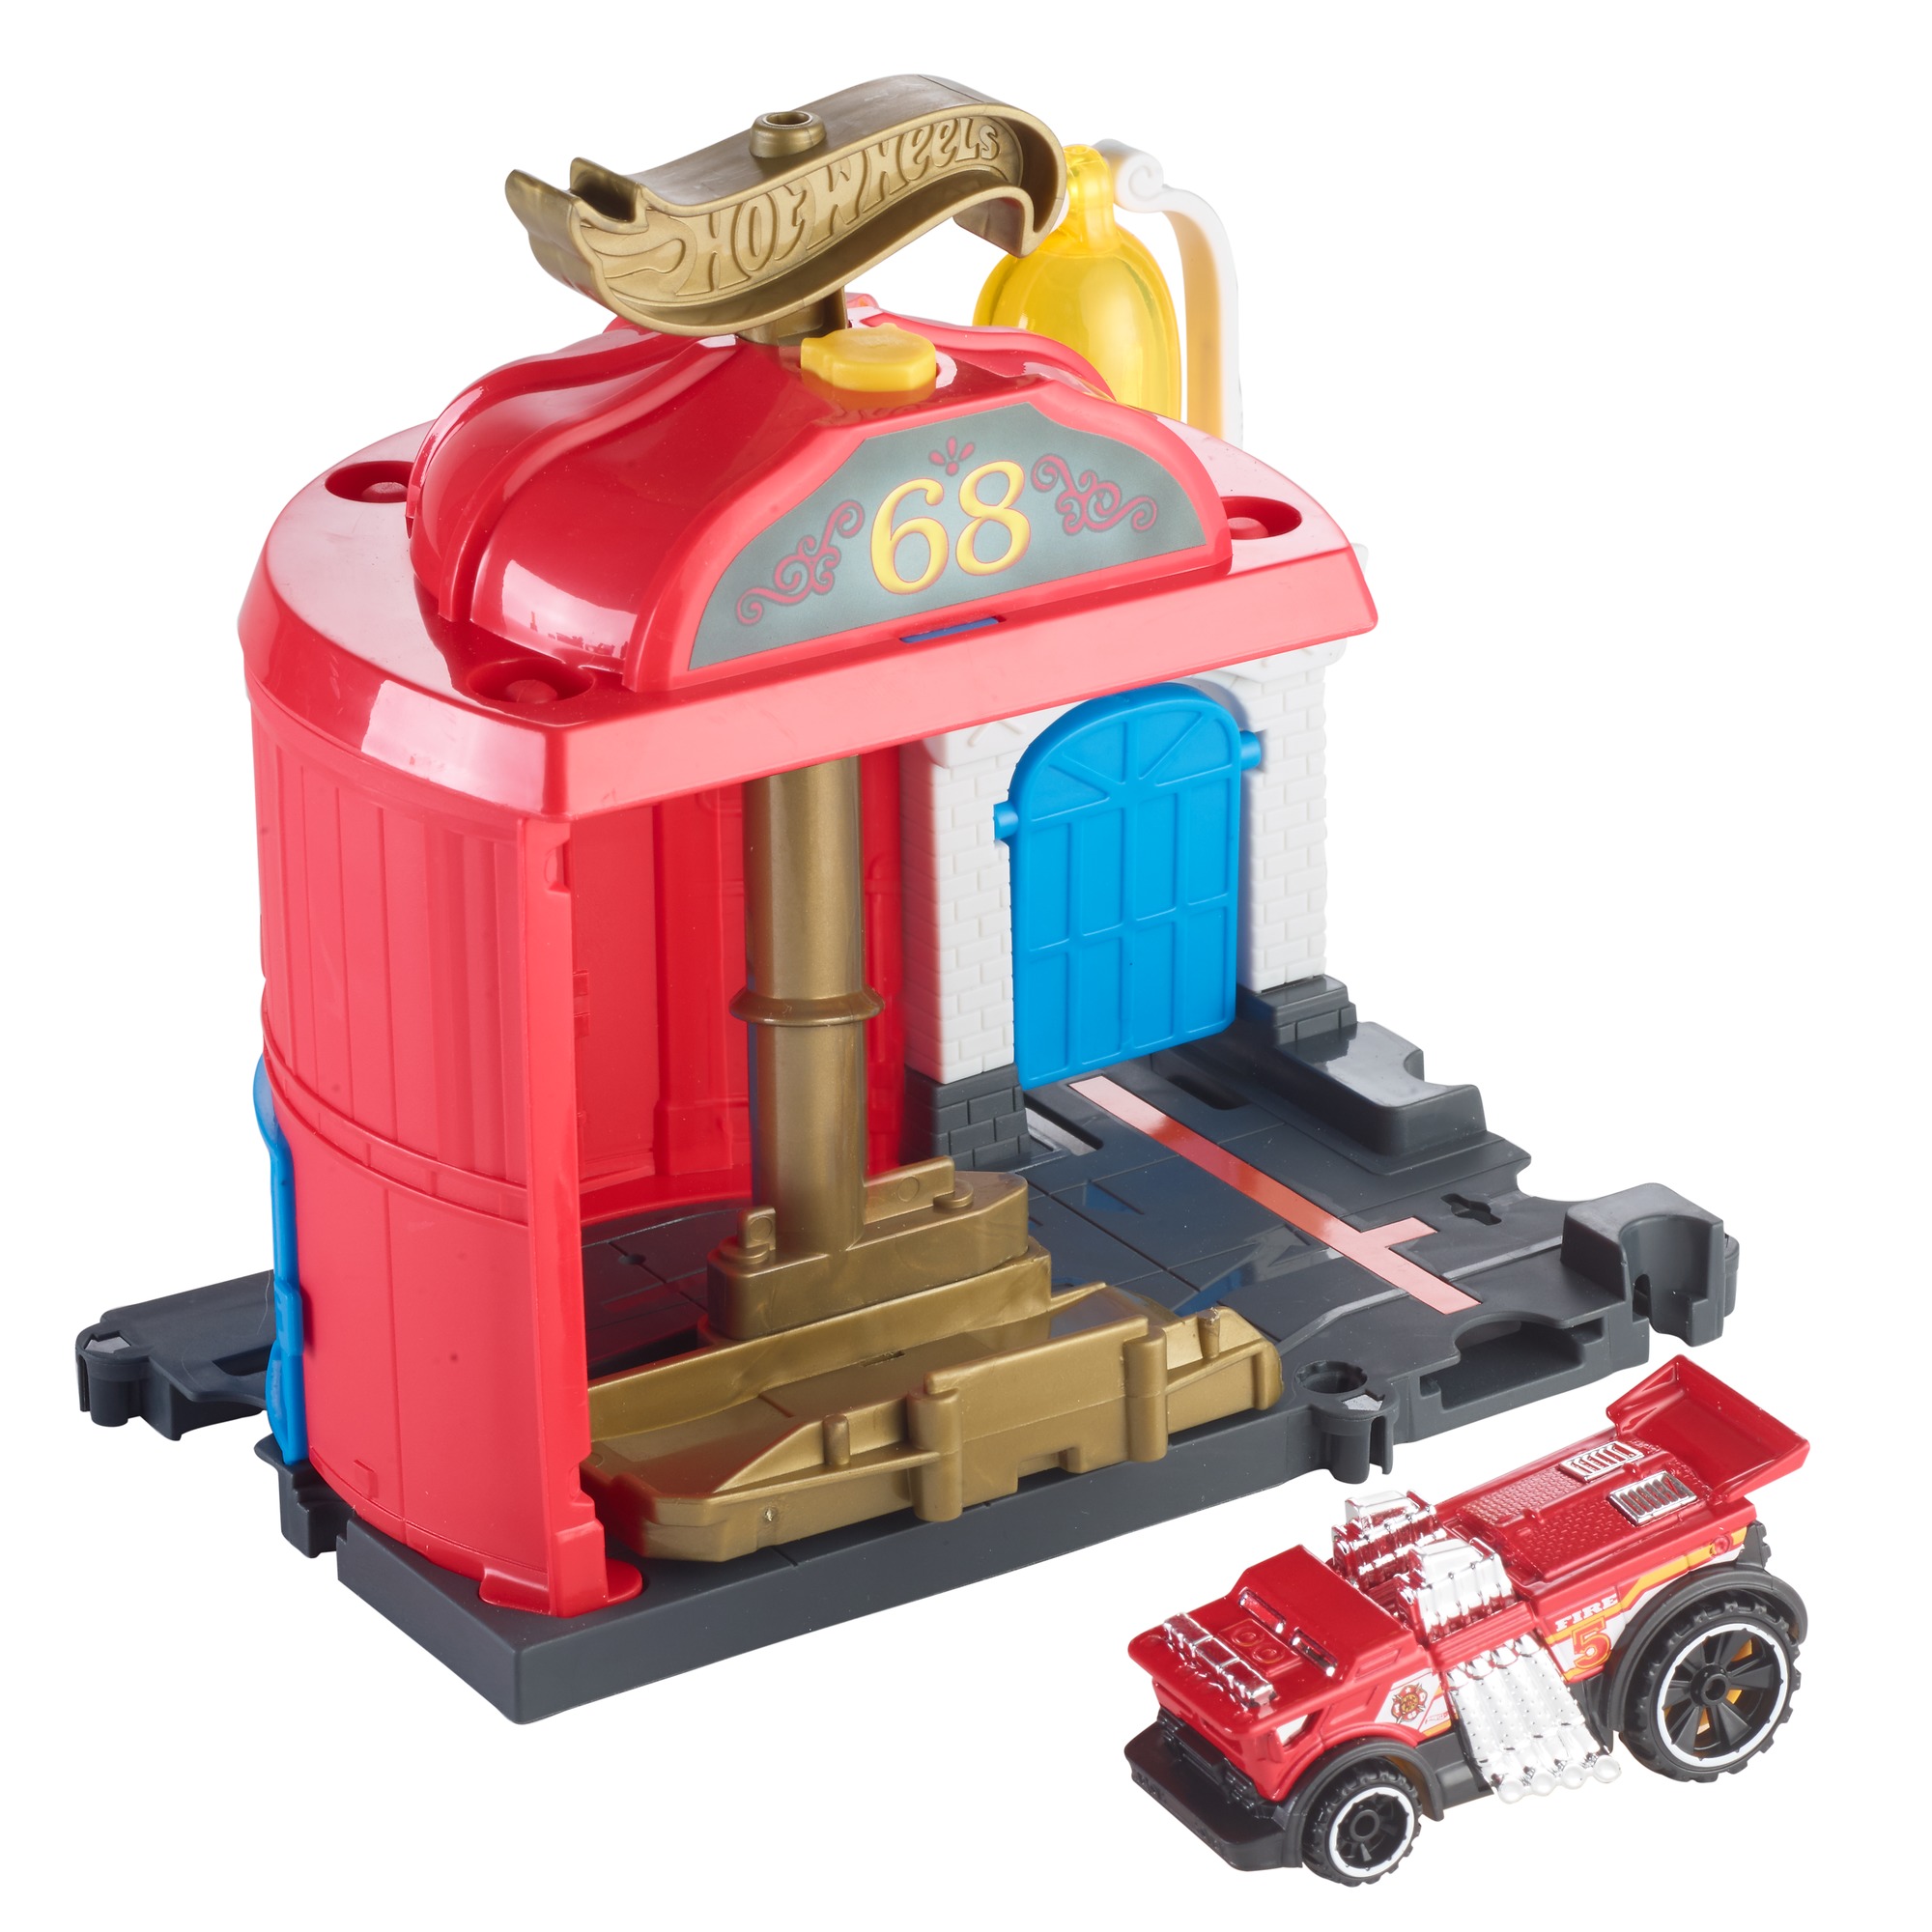 Hot Wheels City Downtown Fire Station Spinout Play Set - image 1 of 7